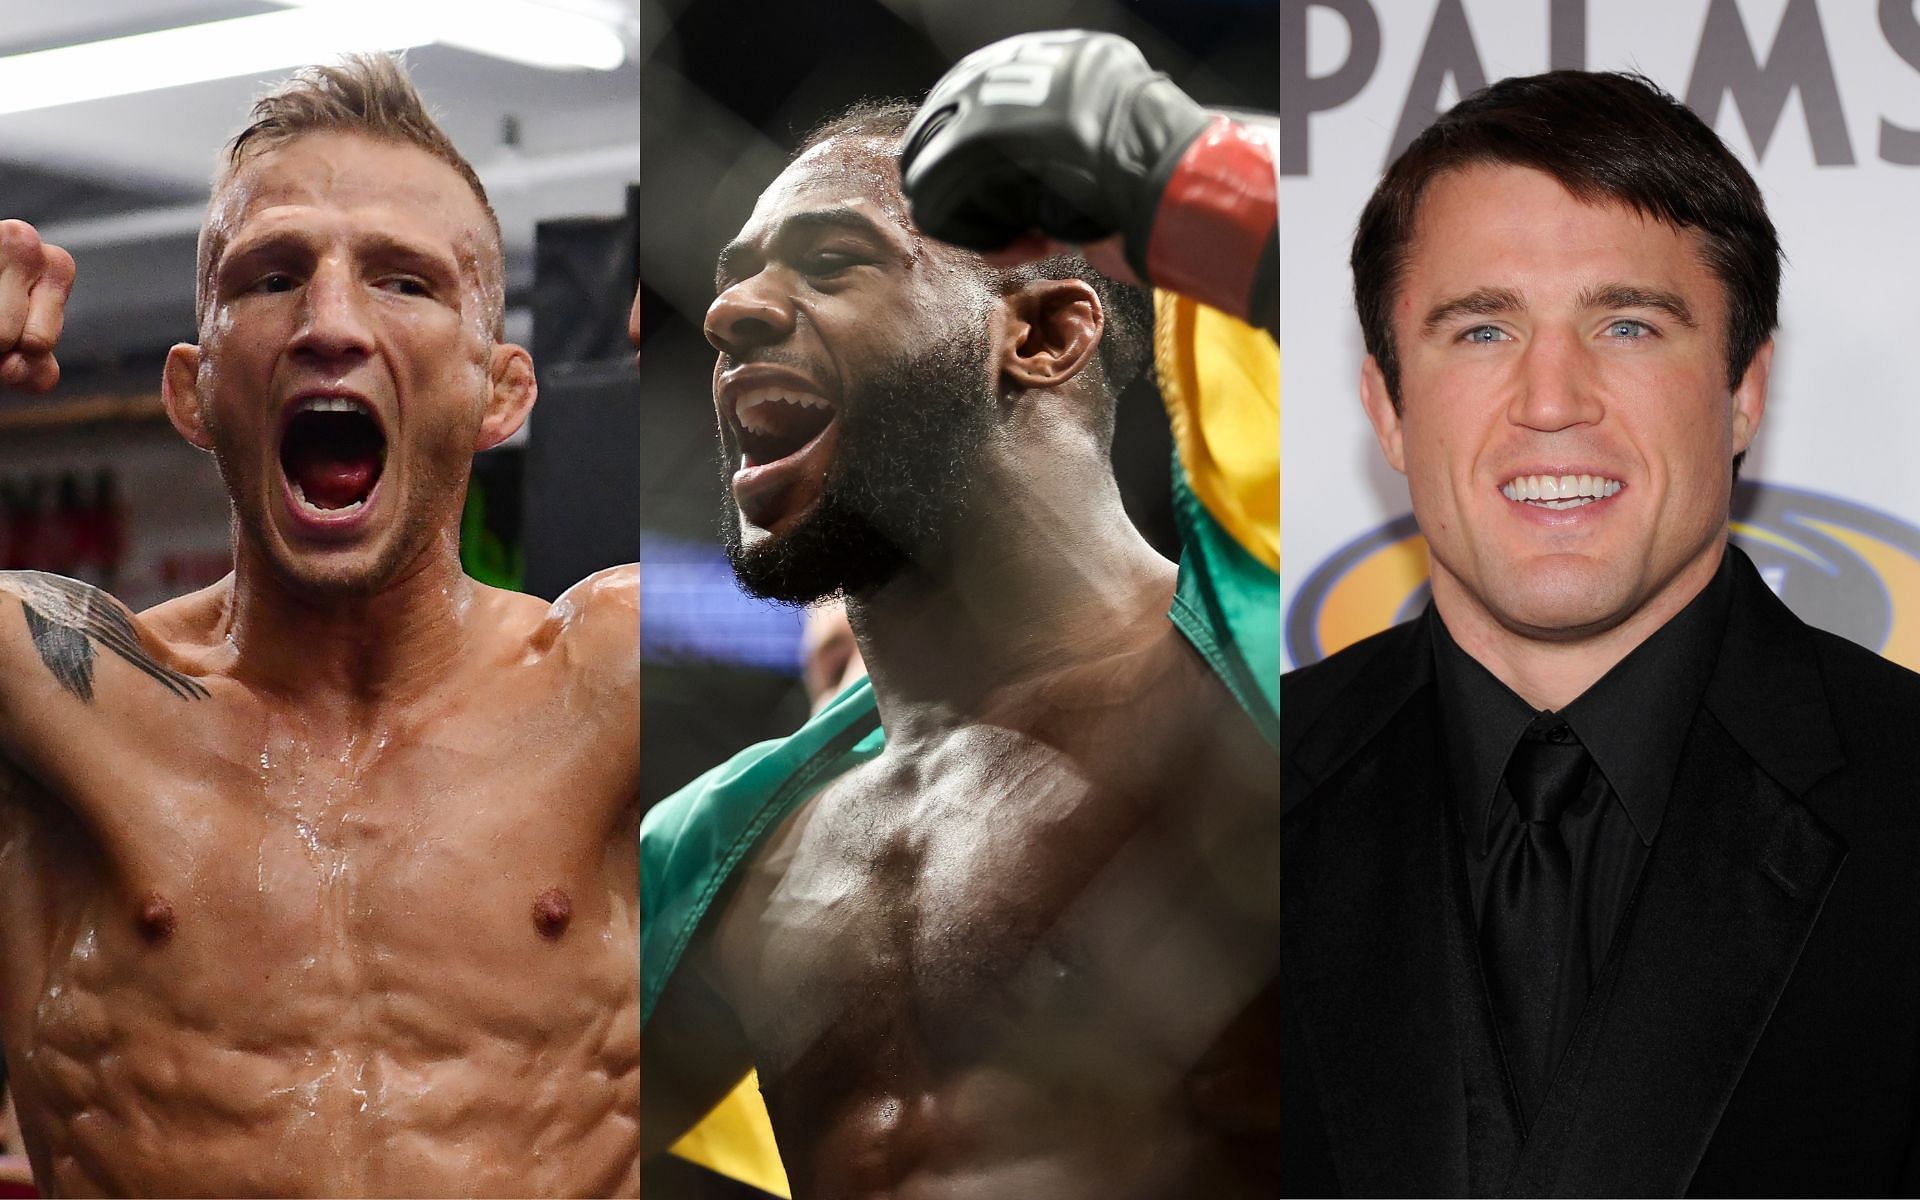 T.J. Dillashaw (Left), Aljamain Sterling (Middle), and Chael Sonnen (Right)